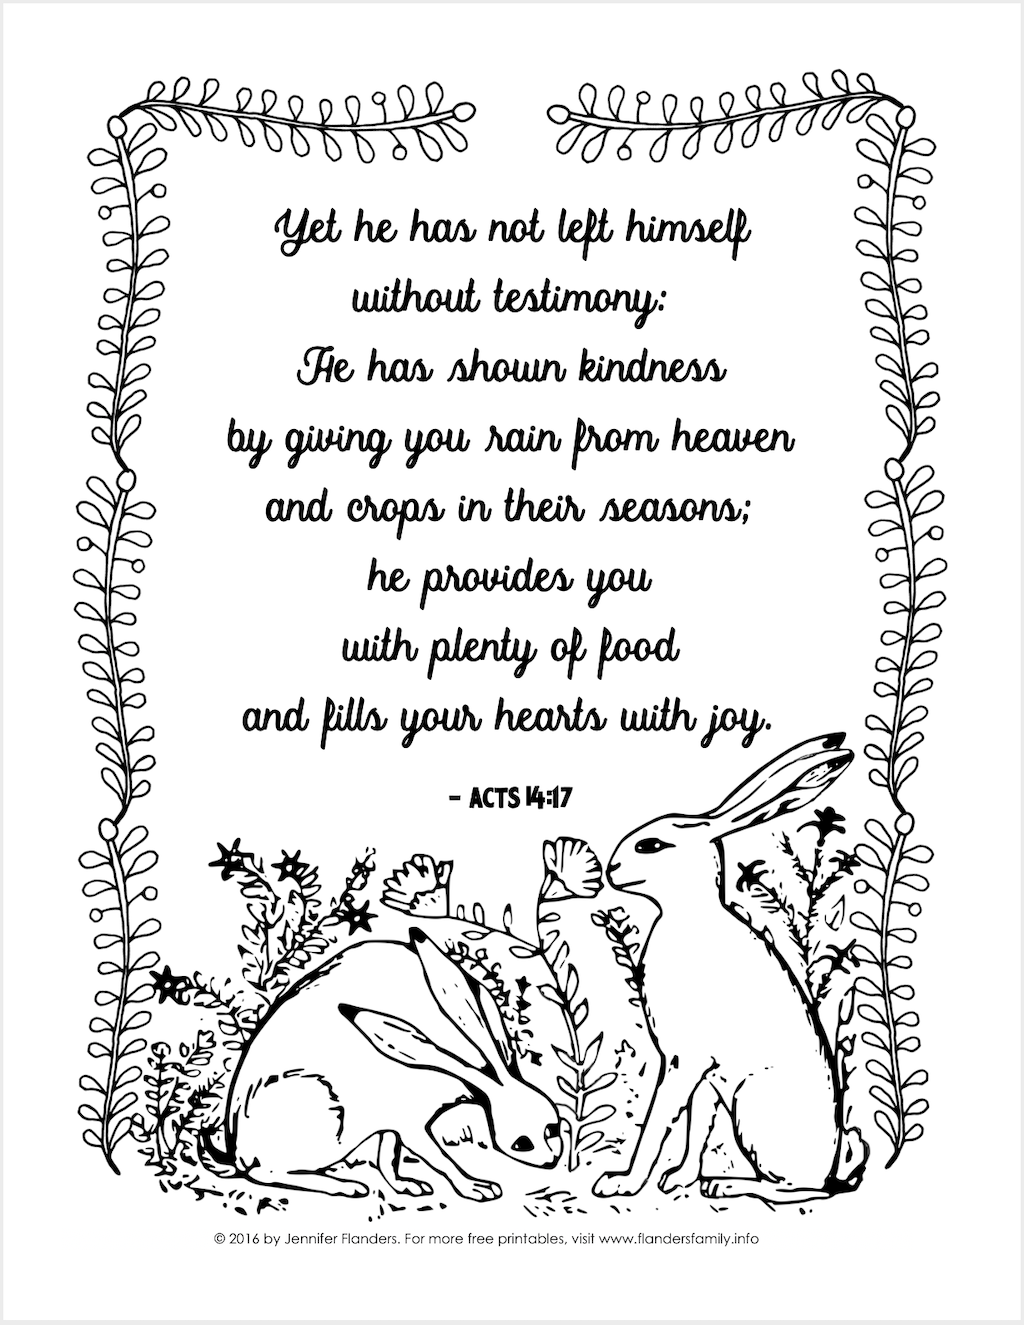 Kindness from Heaven Coloring Page